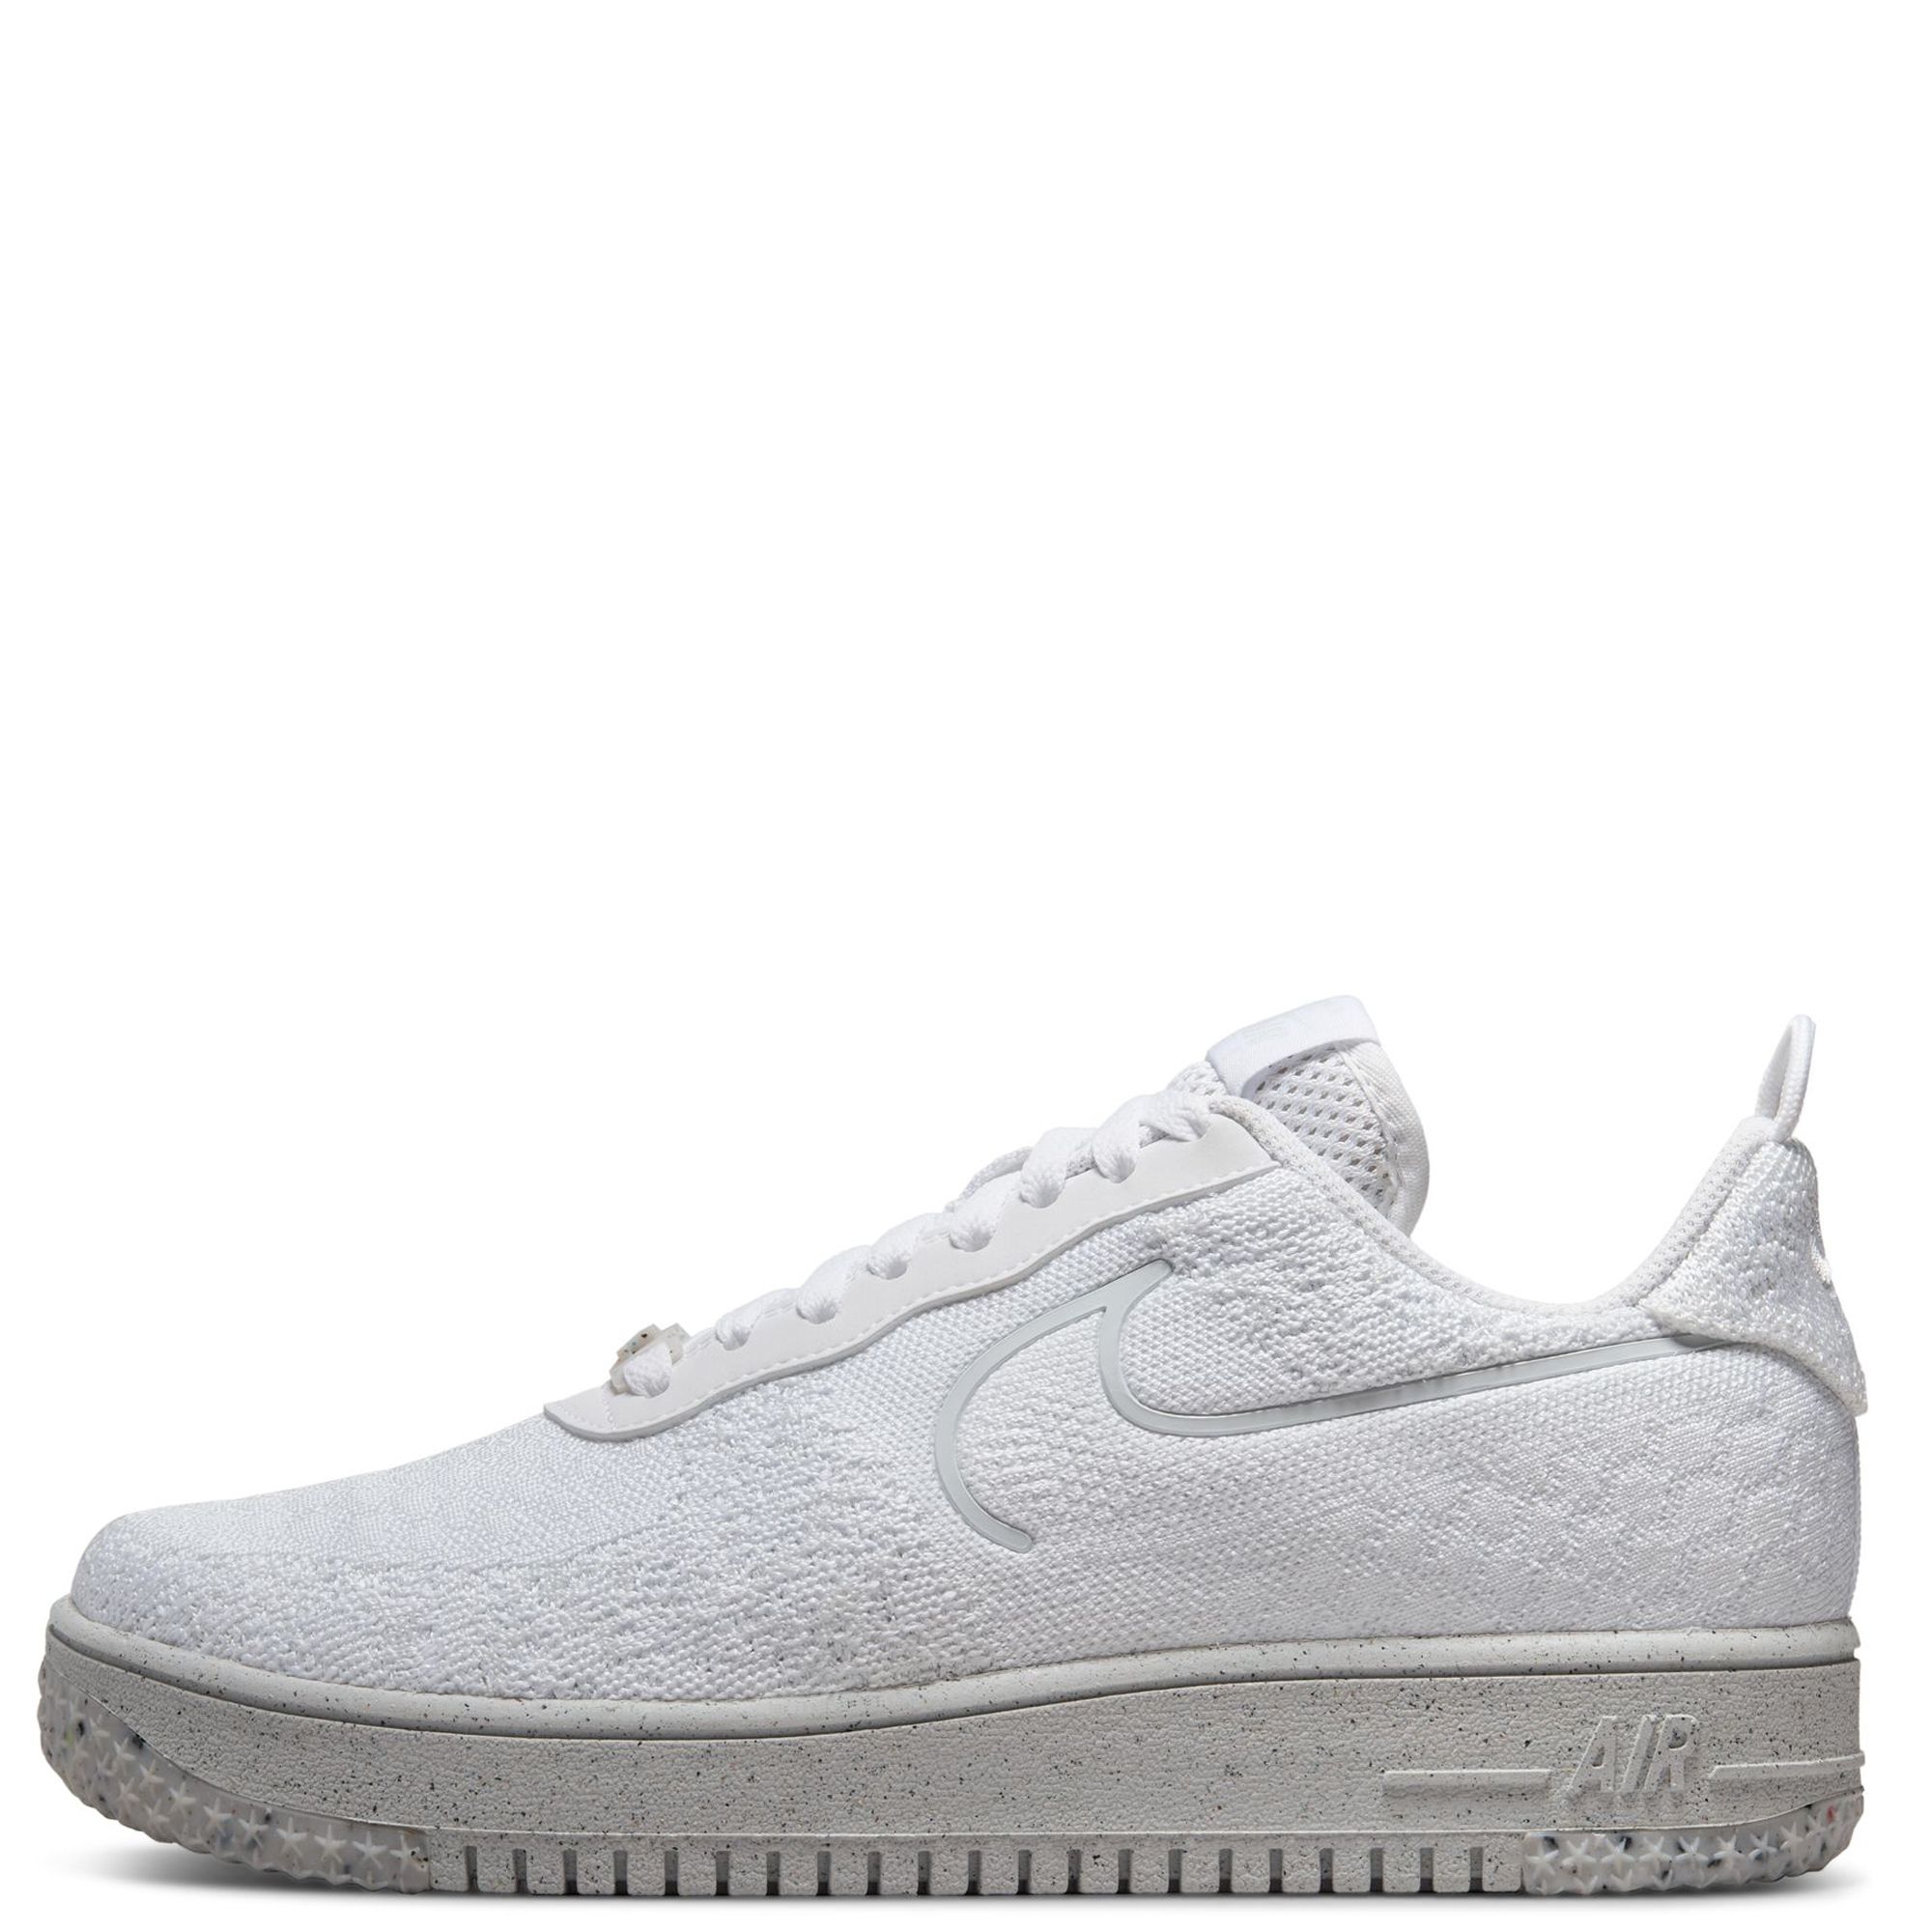 Nike Air Force 1 LV8 Platinum Tint Review& On foot 